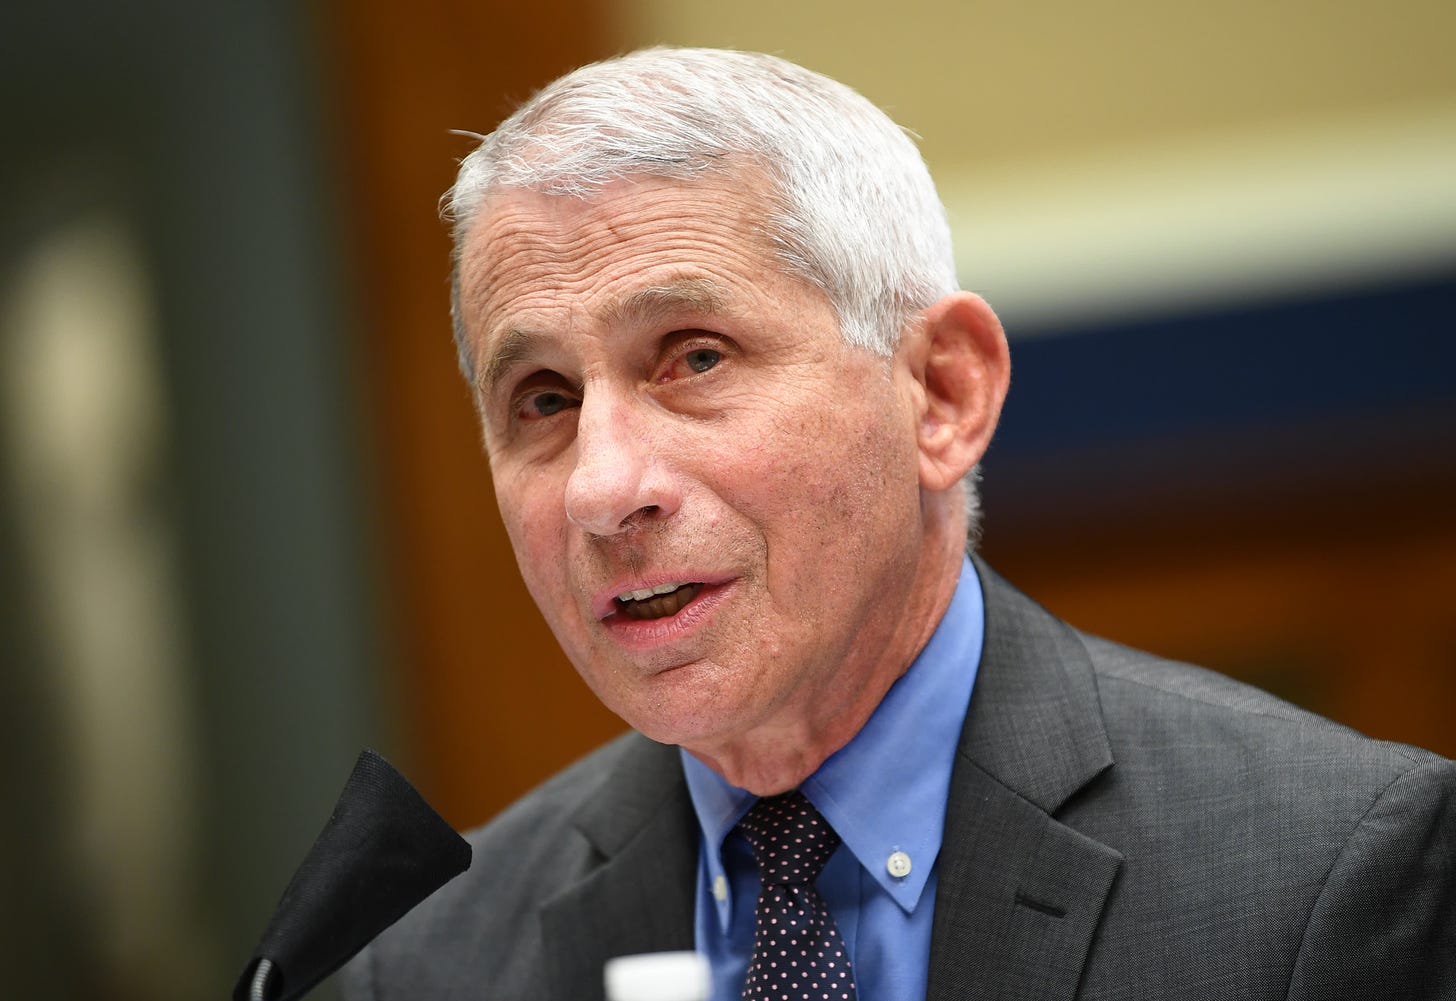 Coronavirus vaccine: Dr. Fauci says chance of it being highly effective is  not great